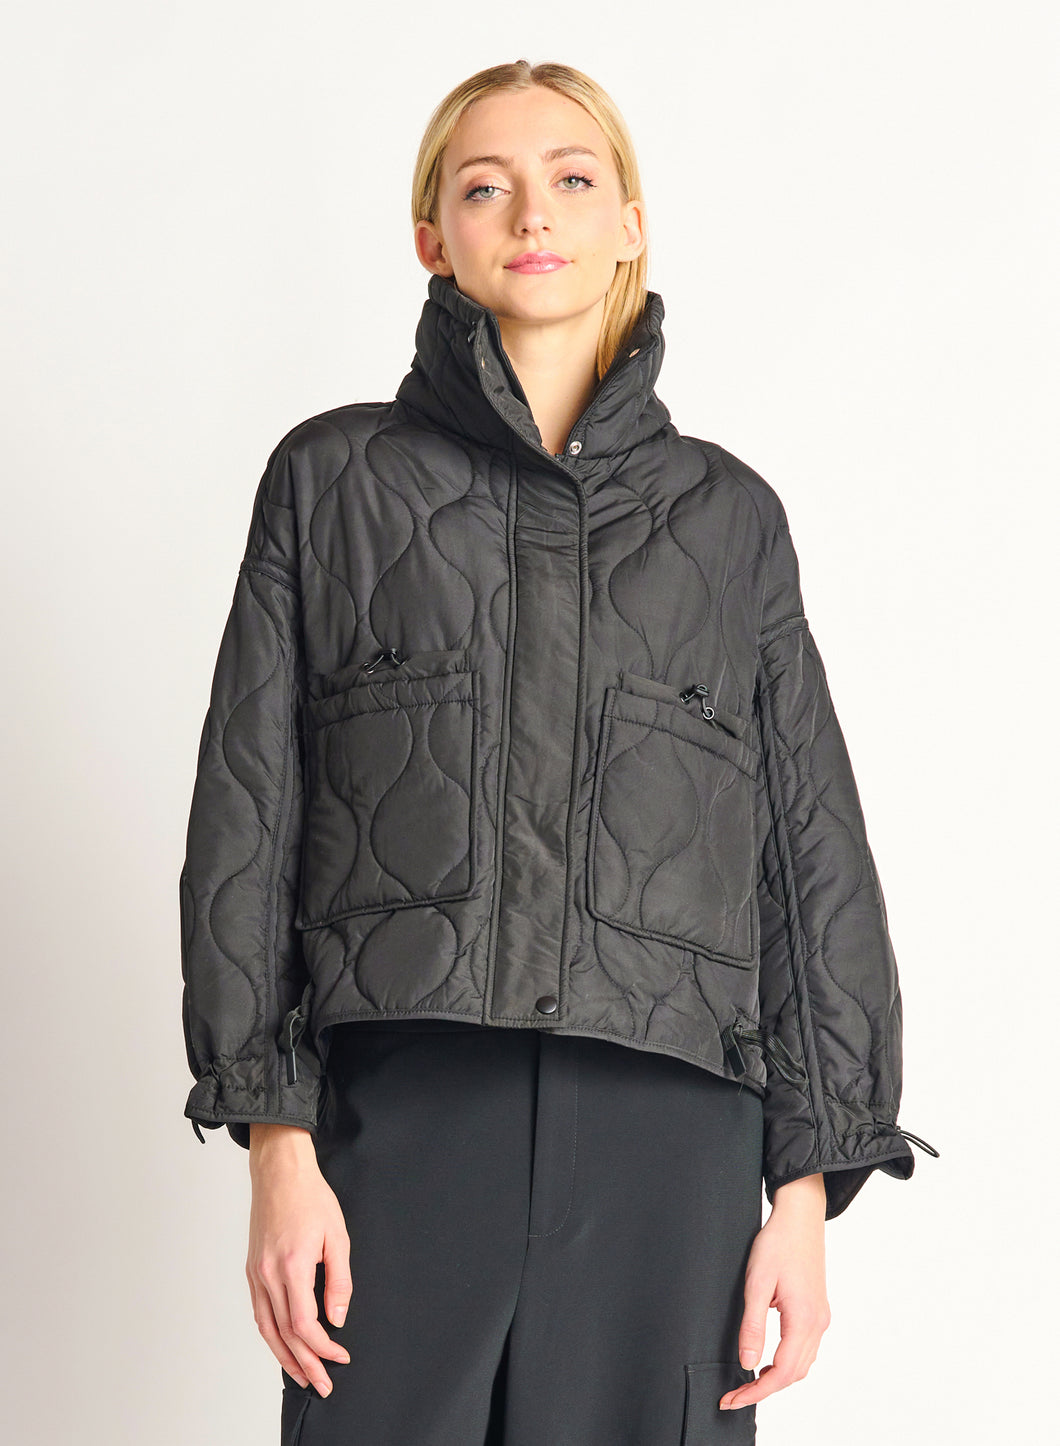 QUILTED DRAWSTRING PUFFER JACKET by Dex